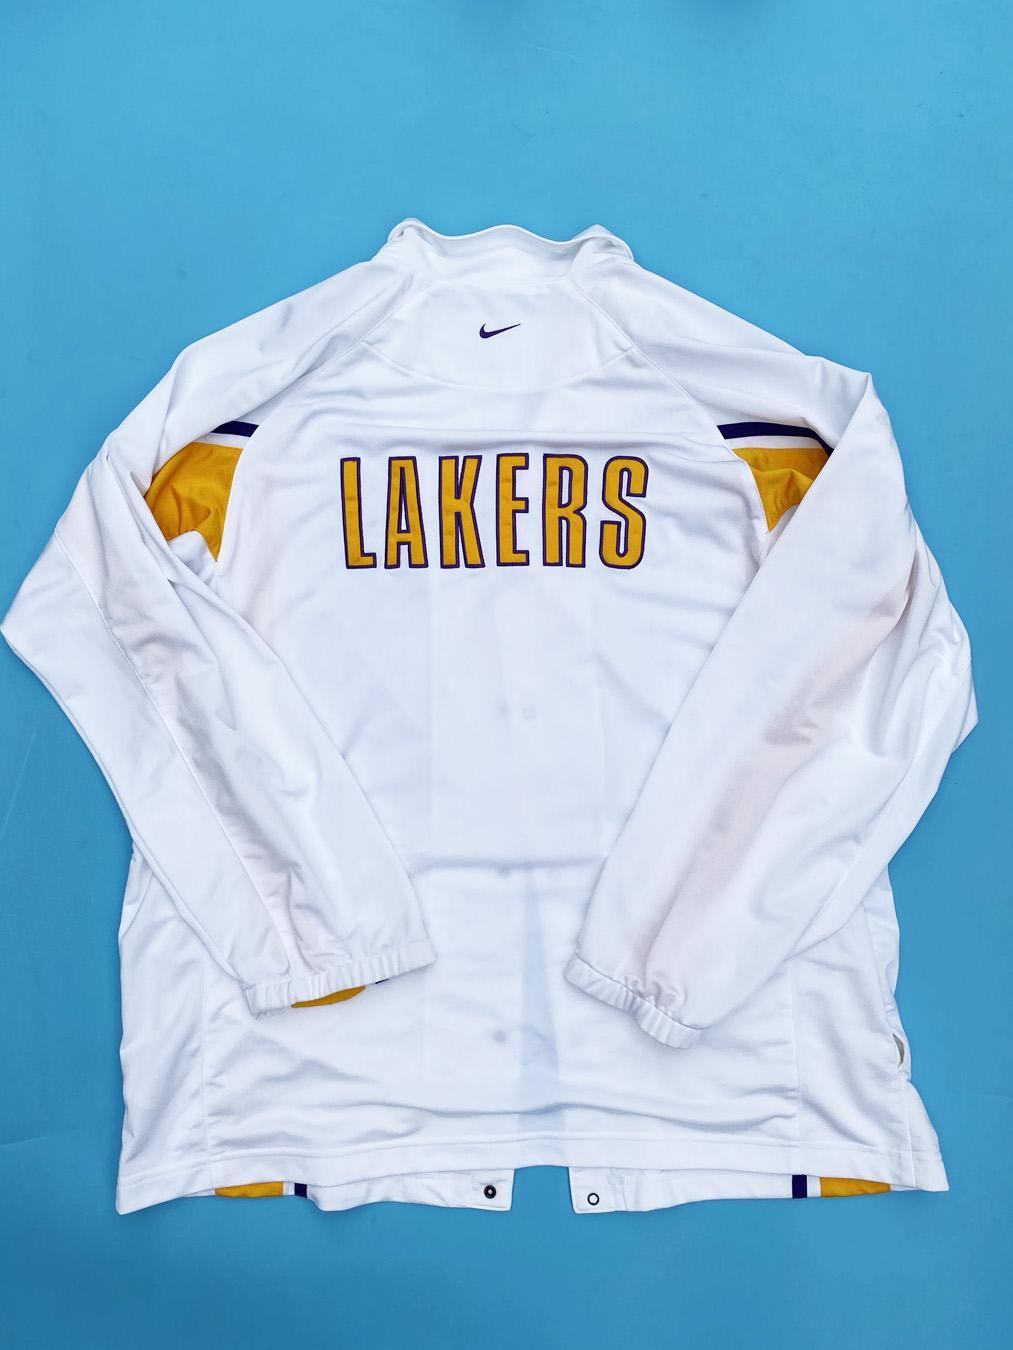 lakers long sleeve warm up